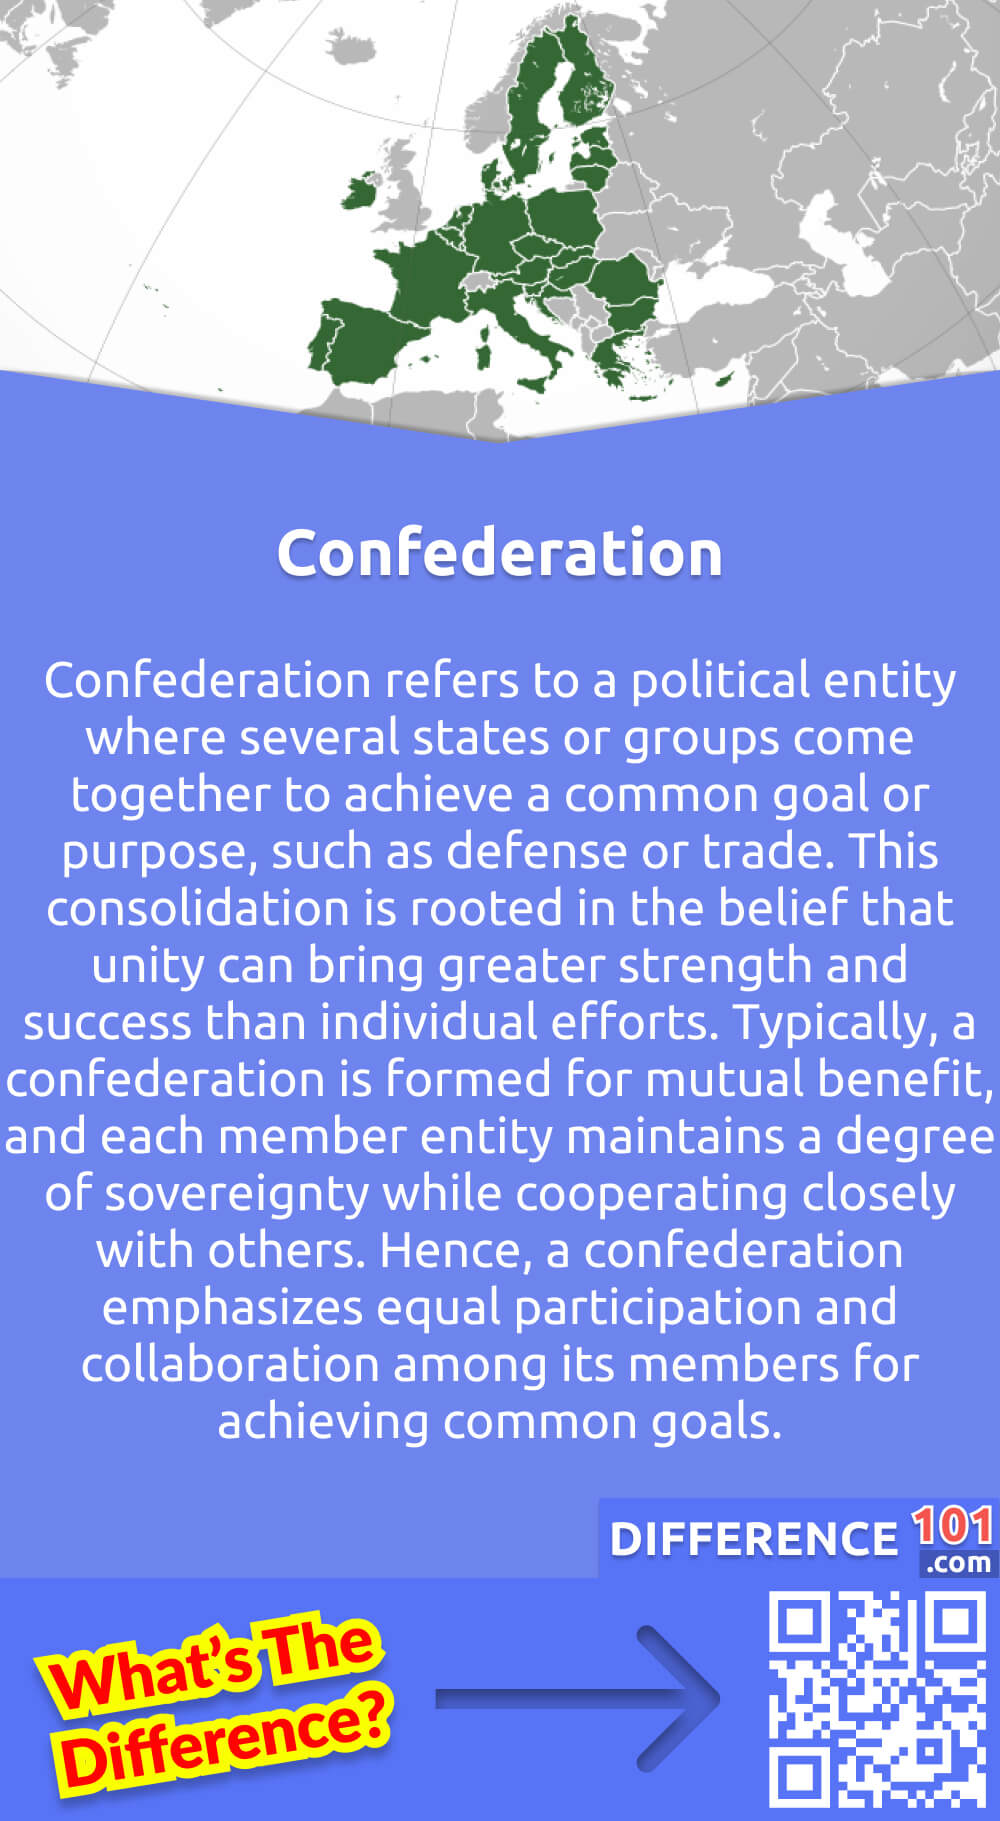 What Is Confederation? Confederation refers to a political entity where several states or groups come together to achieve a common goal or purpose, such as defense or trade. This consolidation is rooted in the belief that unity can bring greater strength and success than individual efforts. Typically, a confederation is formed for mutual benefit, and each member entity maintains a degree of sovereignty while cooperating closely with others. The United States, for example, was originally formed as a confederation of thirteen colonies to ensure mutual support and protection against British rule, and later, to create an economic union to benefit all member states. Hence, a confederation emphasizes equal participation and collaboration among its members for achieving common goals.